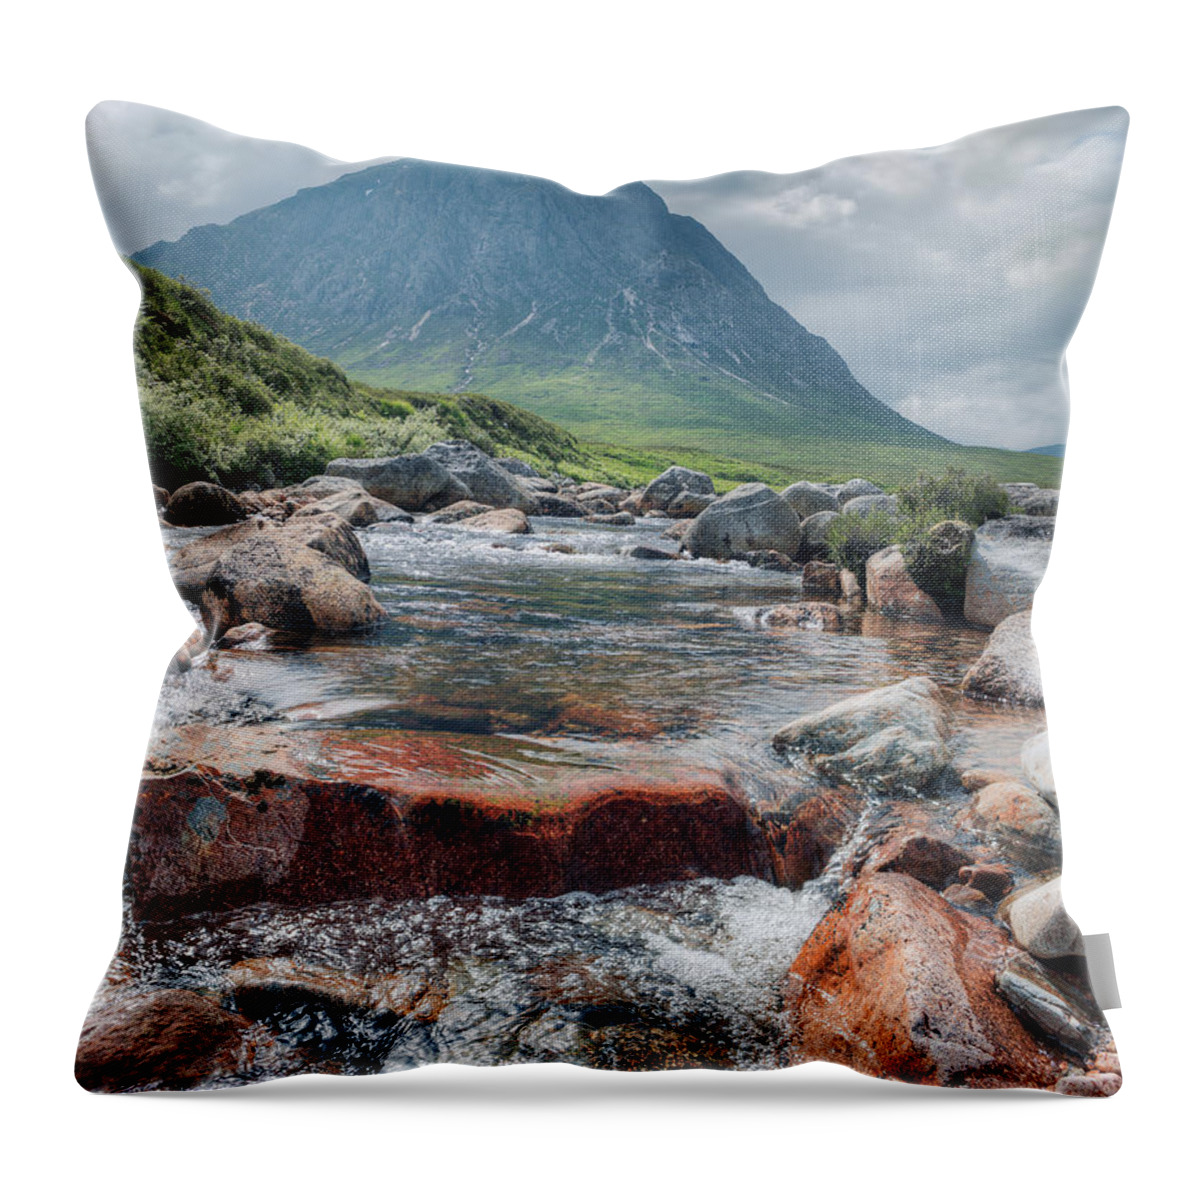 Buachaille Throw Pillow featuring the photograph Buachaille Etive Mor by Ray Devlin